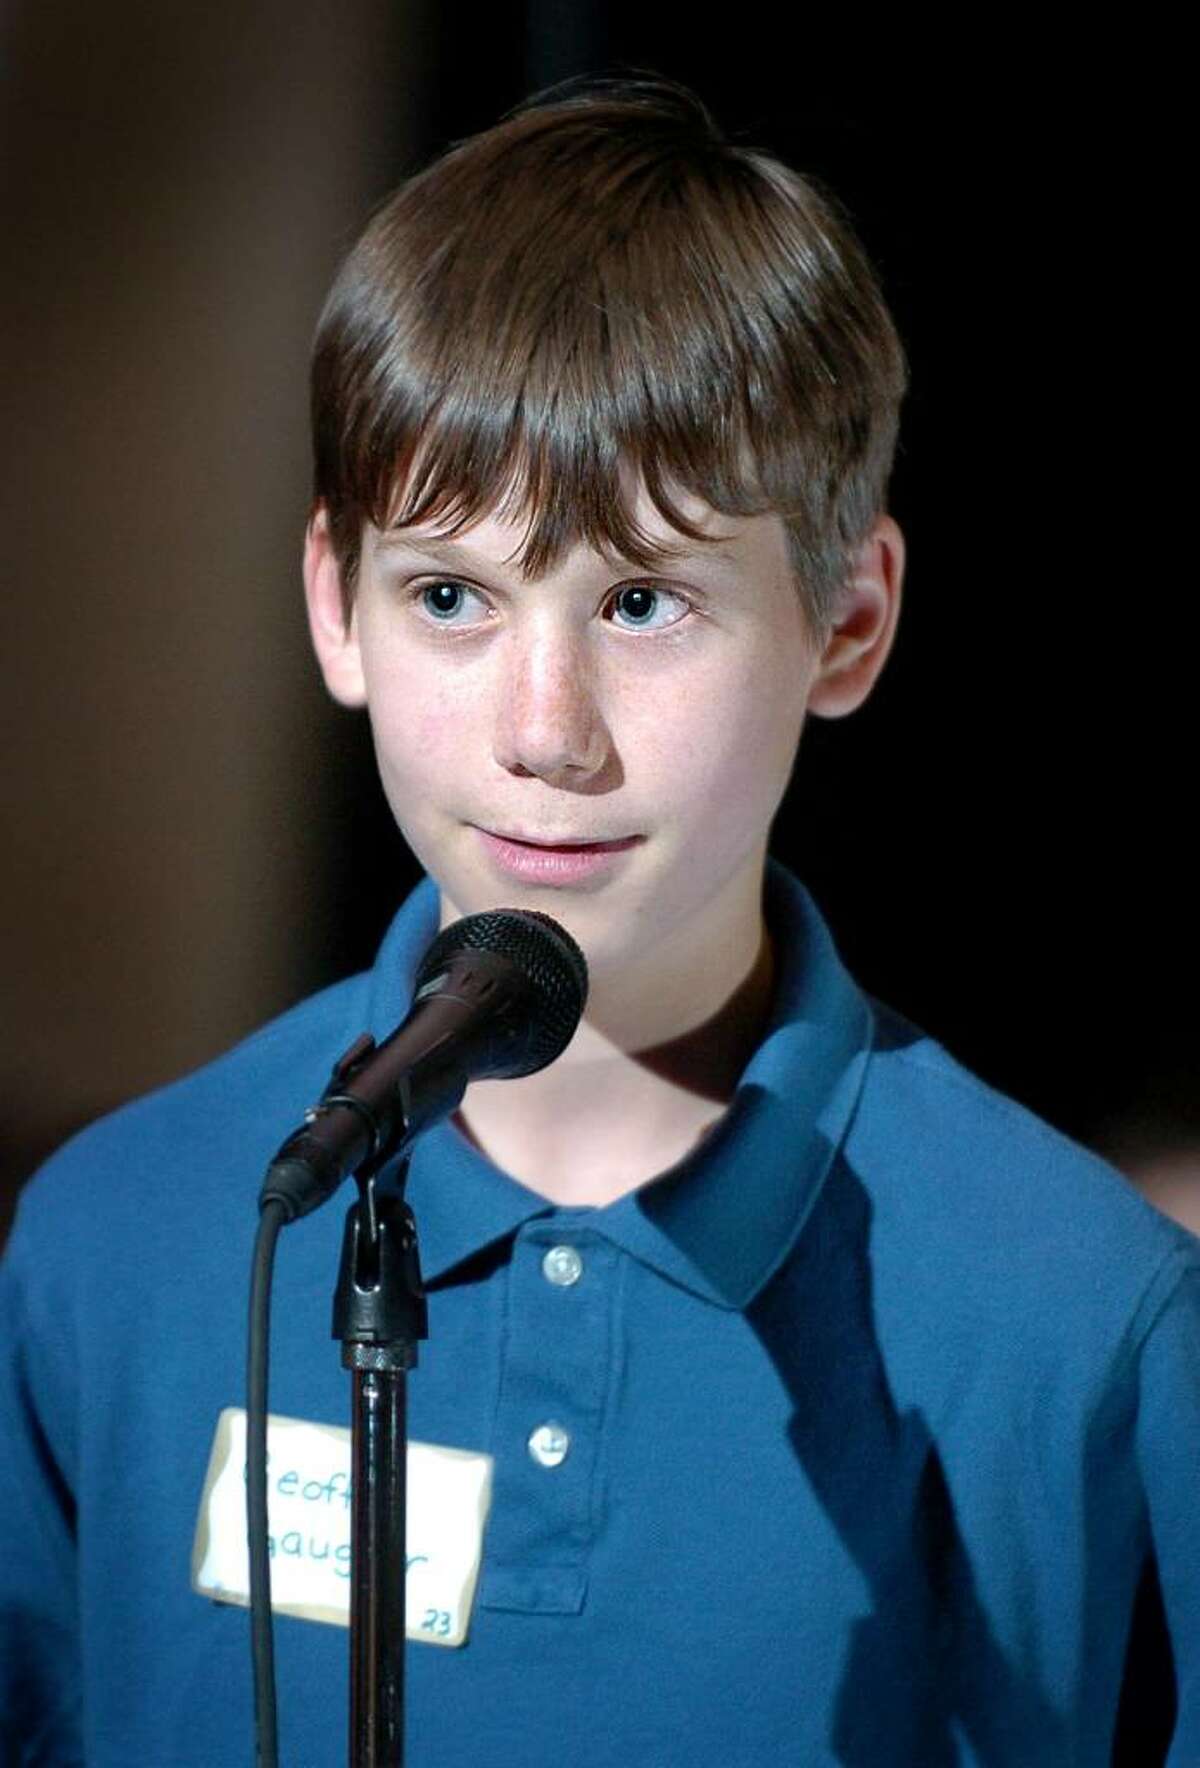 Geoffrey Gaugler, a Burr School student, competes in the final round of Fairfield's townwide spelling bee , sponsored by the Junior Women's Club of Fairfield, Thursday Feb. 25, 2010 at Roger Ludlowe Middle School. Gaugler took second place in the event.